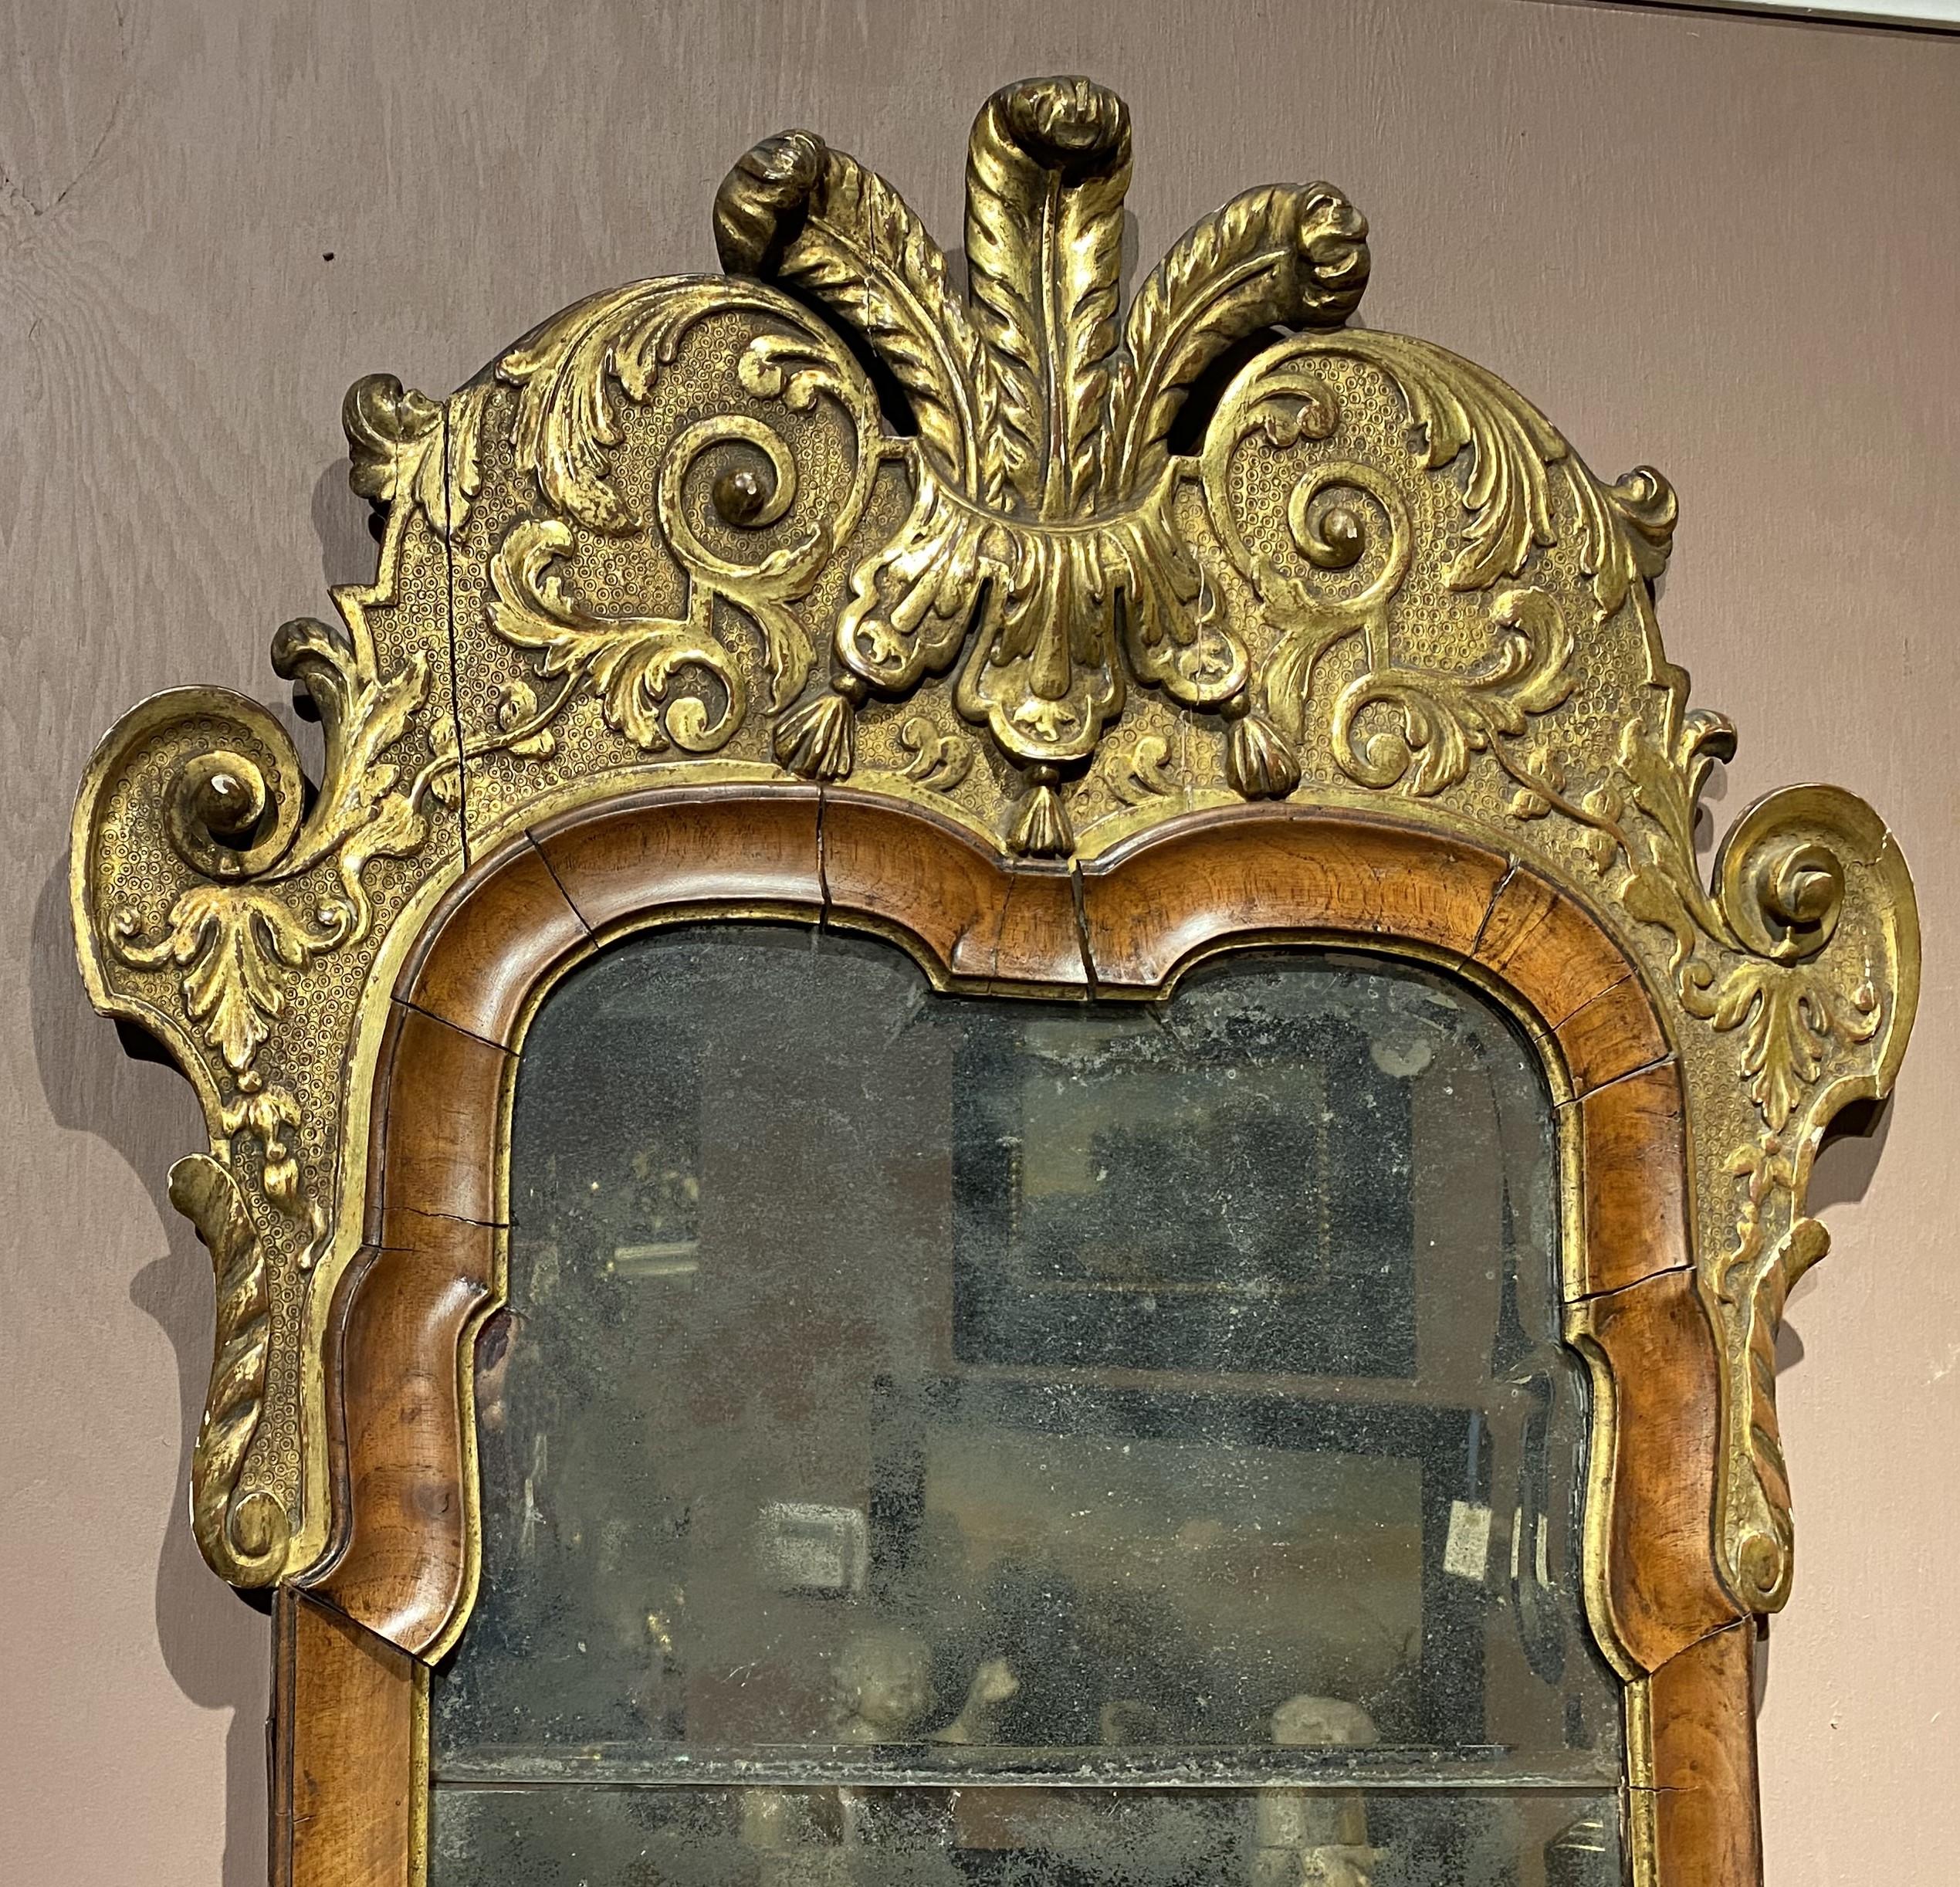 A fine example of a 18th century English walnut & mahogany looking glass with original mirror plate and scroll carved gilt crest with the Prince of Wales feather. The looking glass is in good overall condition, with some walnut border shrinkage